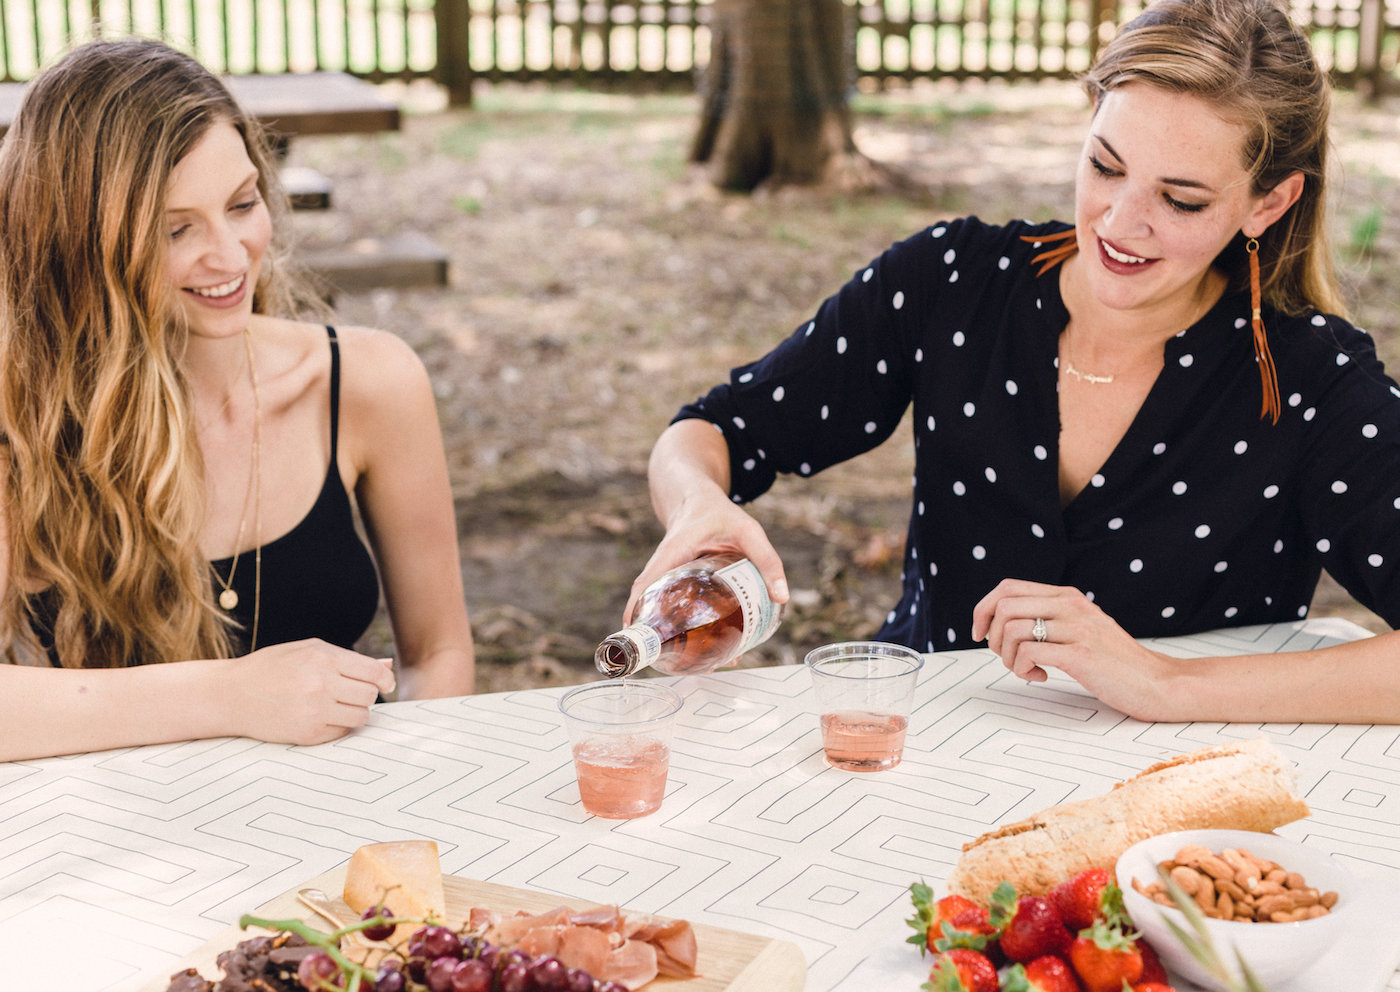 A Picnic styled around a beautiful bottle of South African Rosé // www.thehiveblog.com